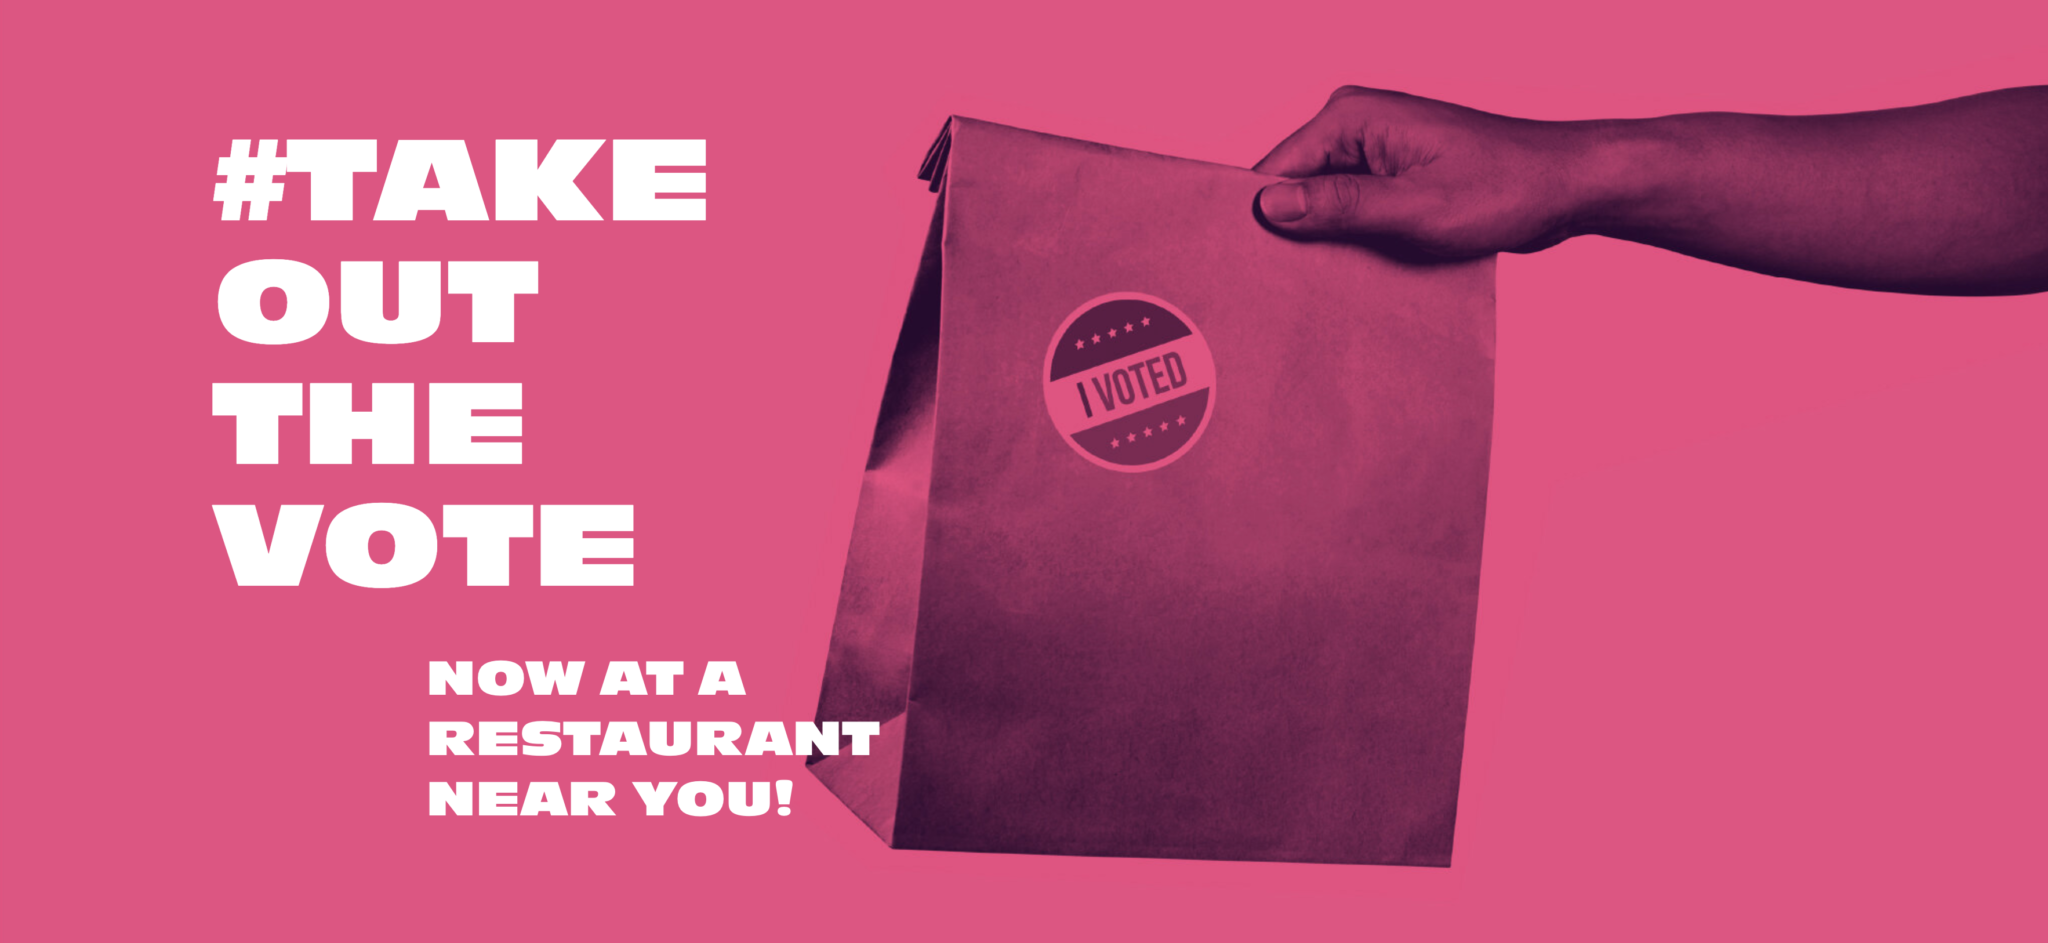 #TakeoutTheVote campaign with to-go food pictured